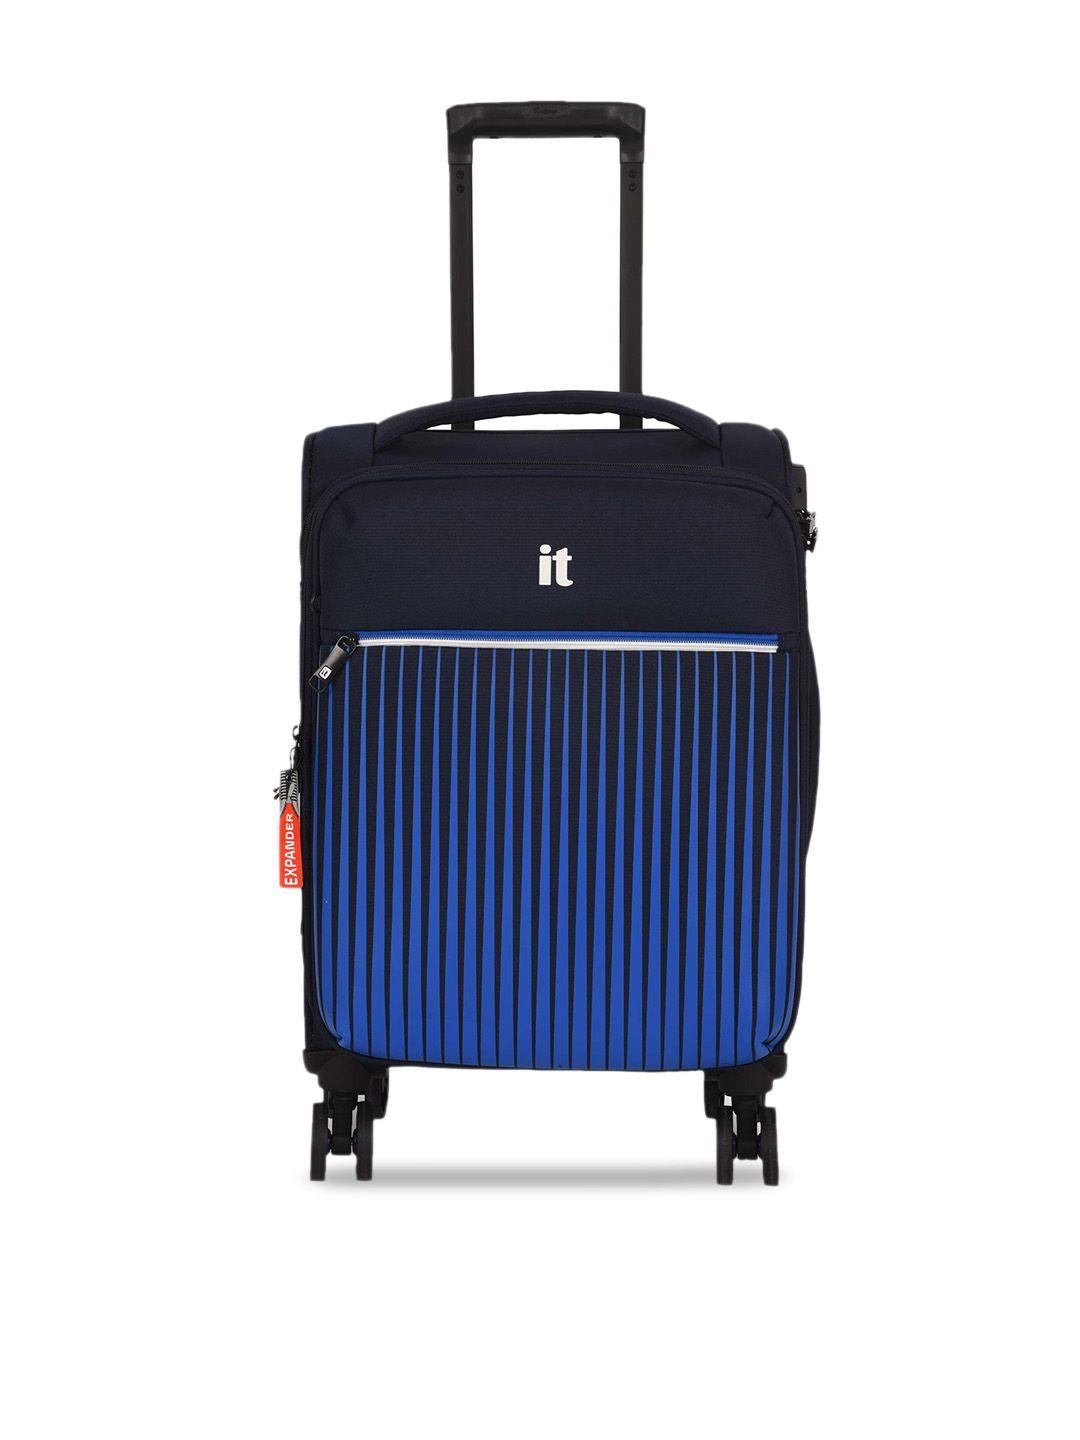 IT luggage The Lite Striped Soft-Sided Trolley Bag